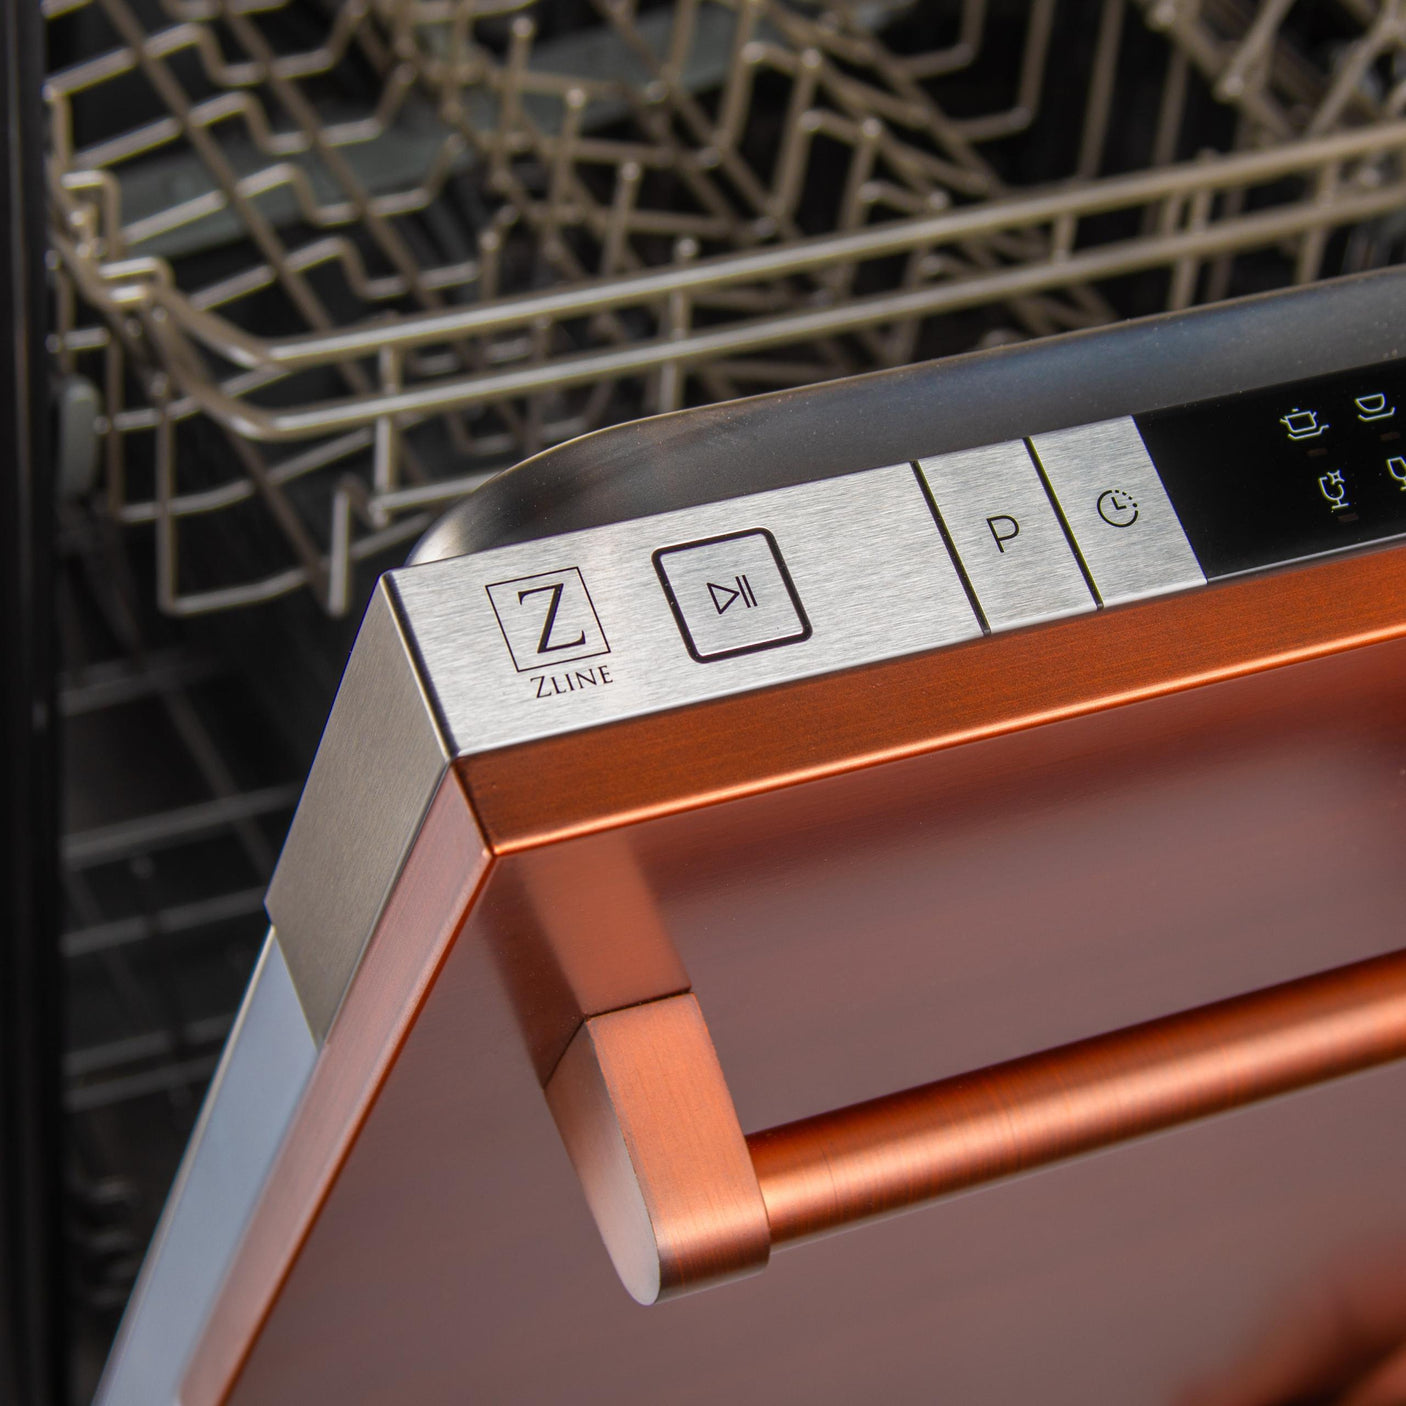 ZLINE 24 in. Top Control Dishwasher with Stainless Steel Tub and Traditional Style Handle, 52dBa (DW-24) [Color: Copper]